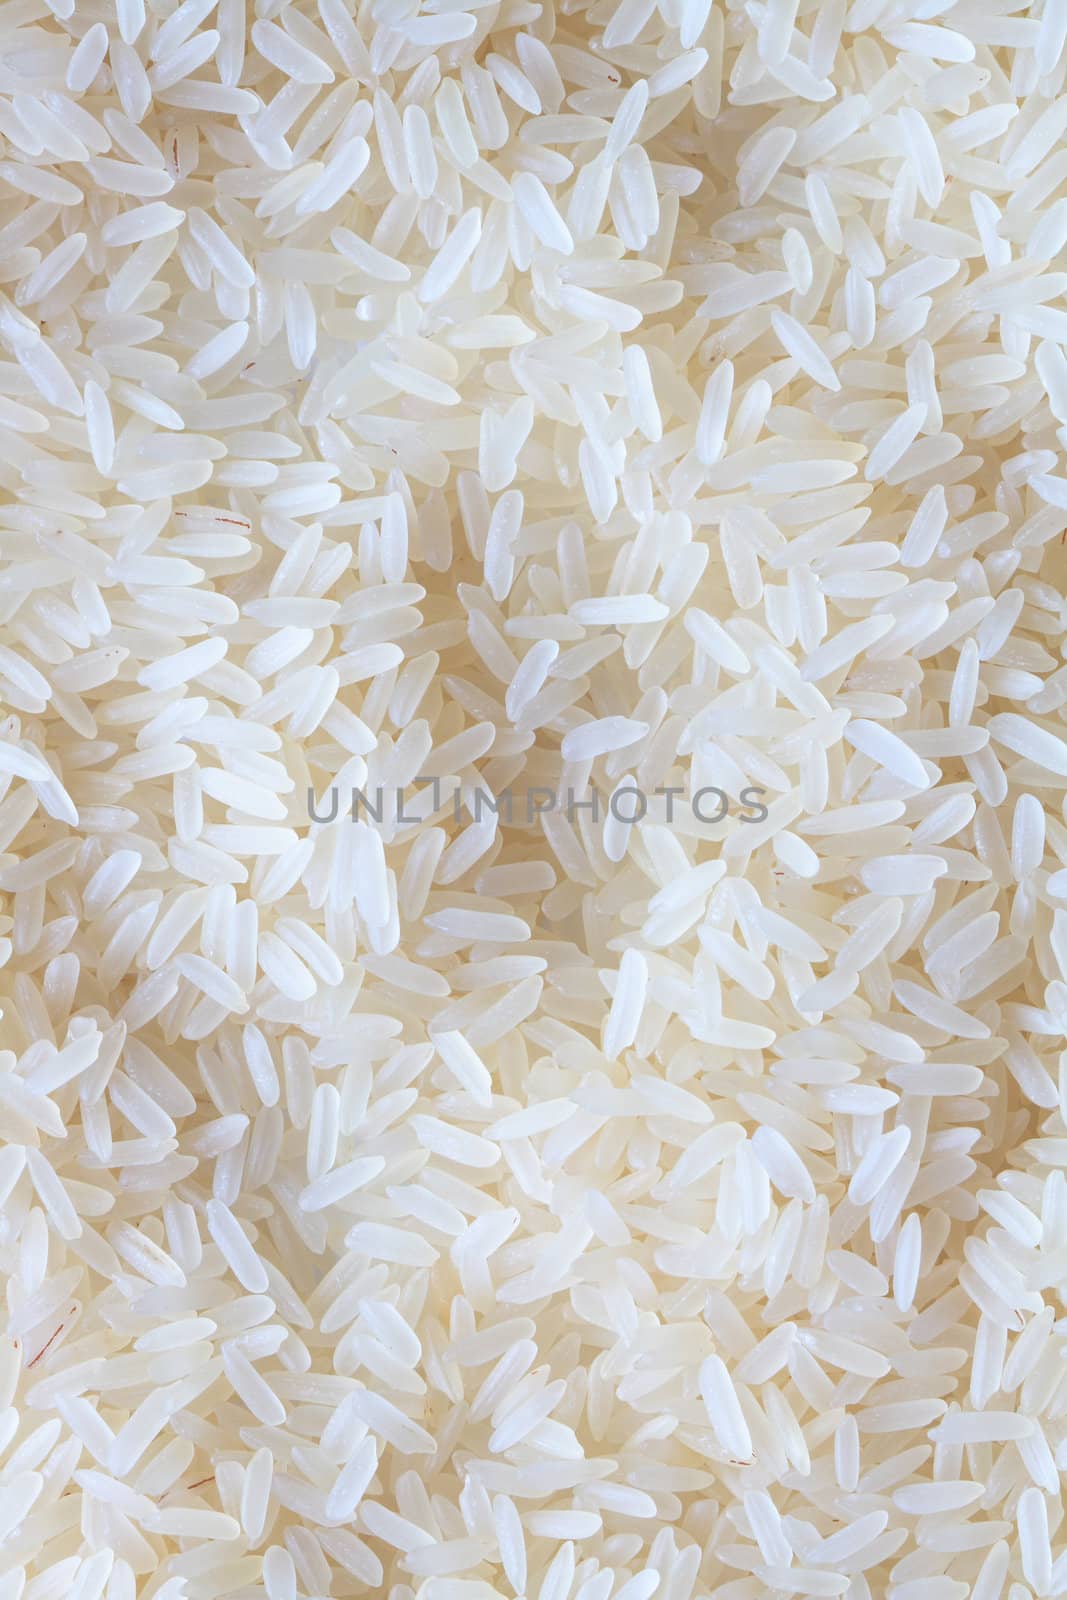 Background made from high quality long rice